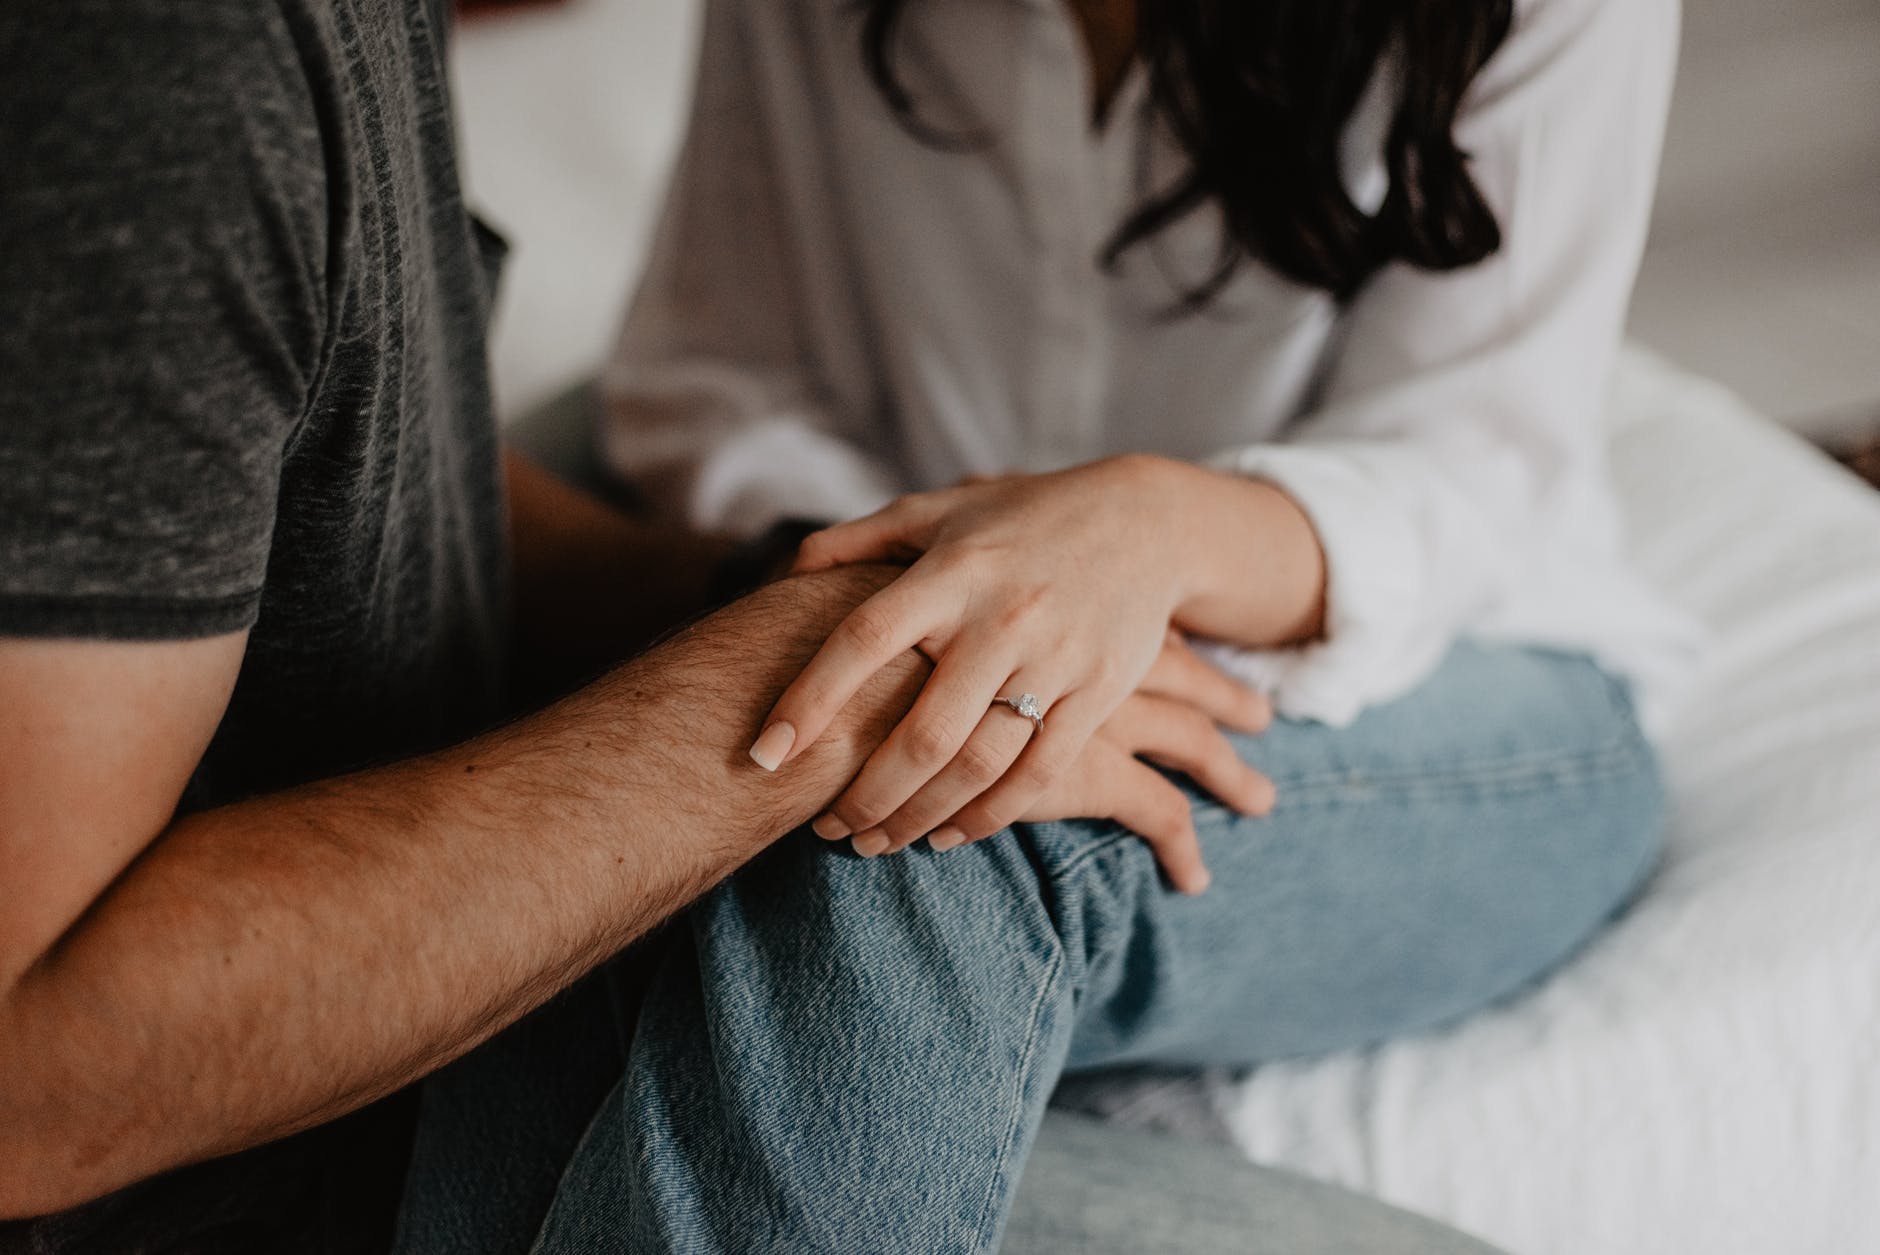 Ken and I ended our engagement although it broke my heart. | Source: Pexels